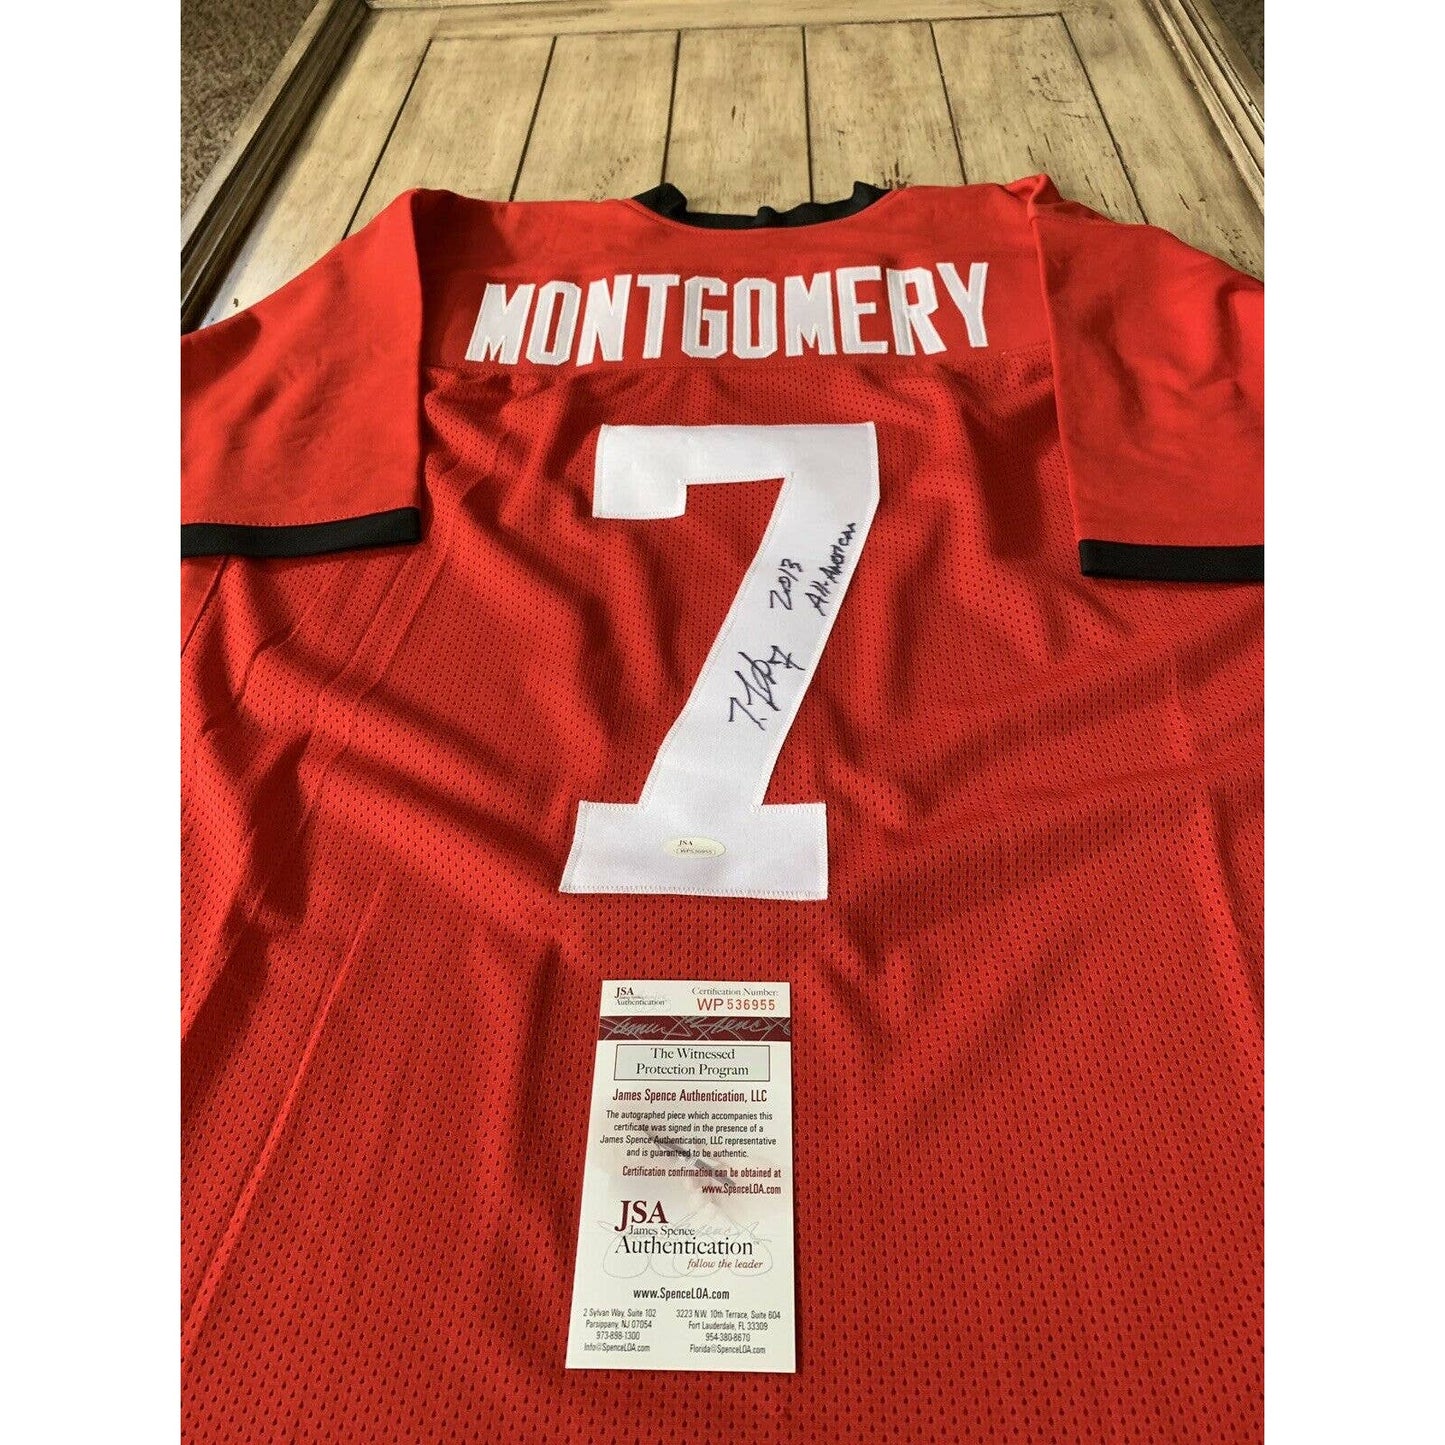 Ty Montgomery Autographed/Signed Jersey JSA COA Stanford Cardinal - TreasuresEvolved